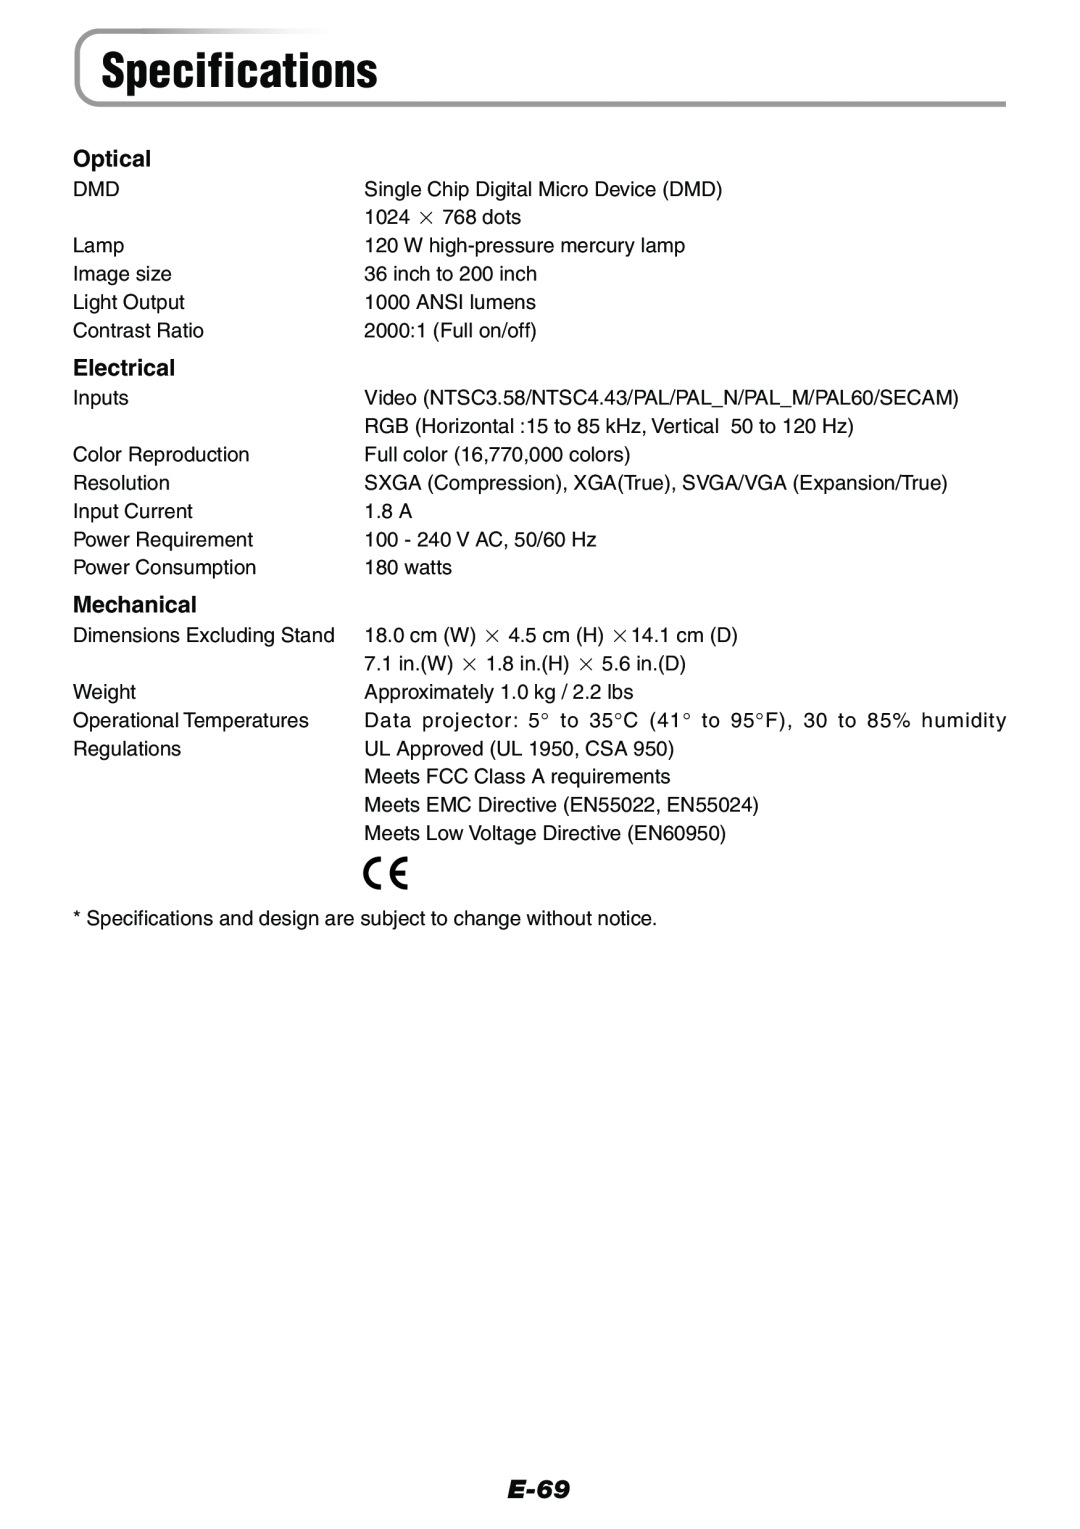 Epson V-1100 user manual Specifications, E-69, Optical, Electrical, Mechanical 